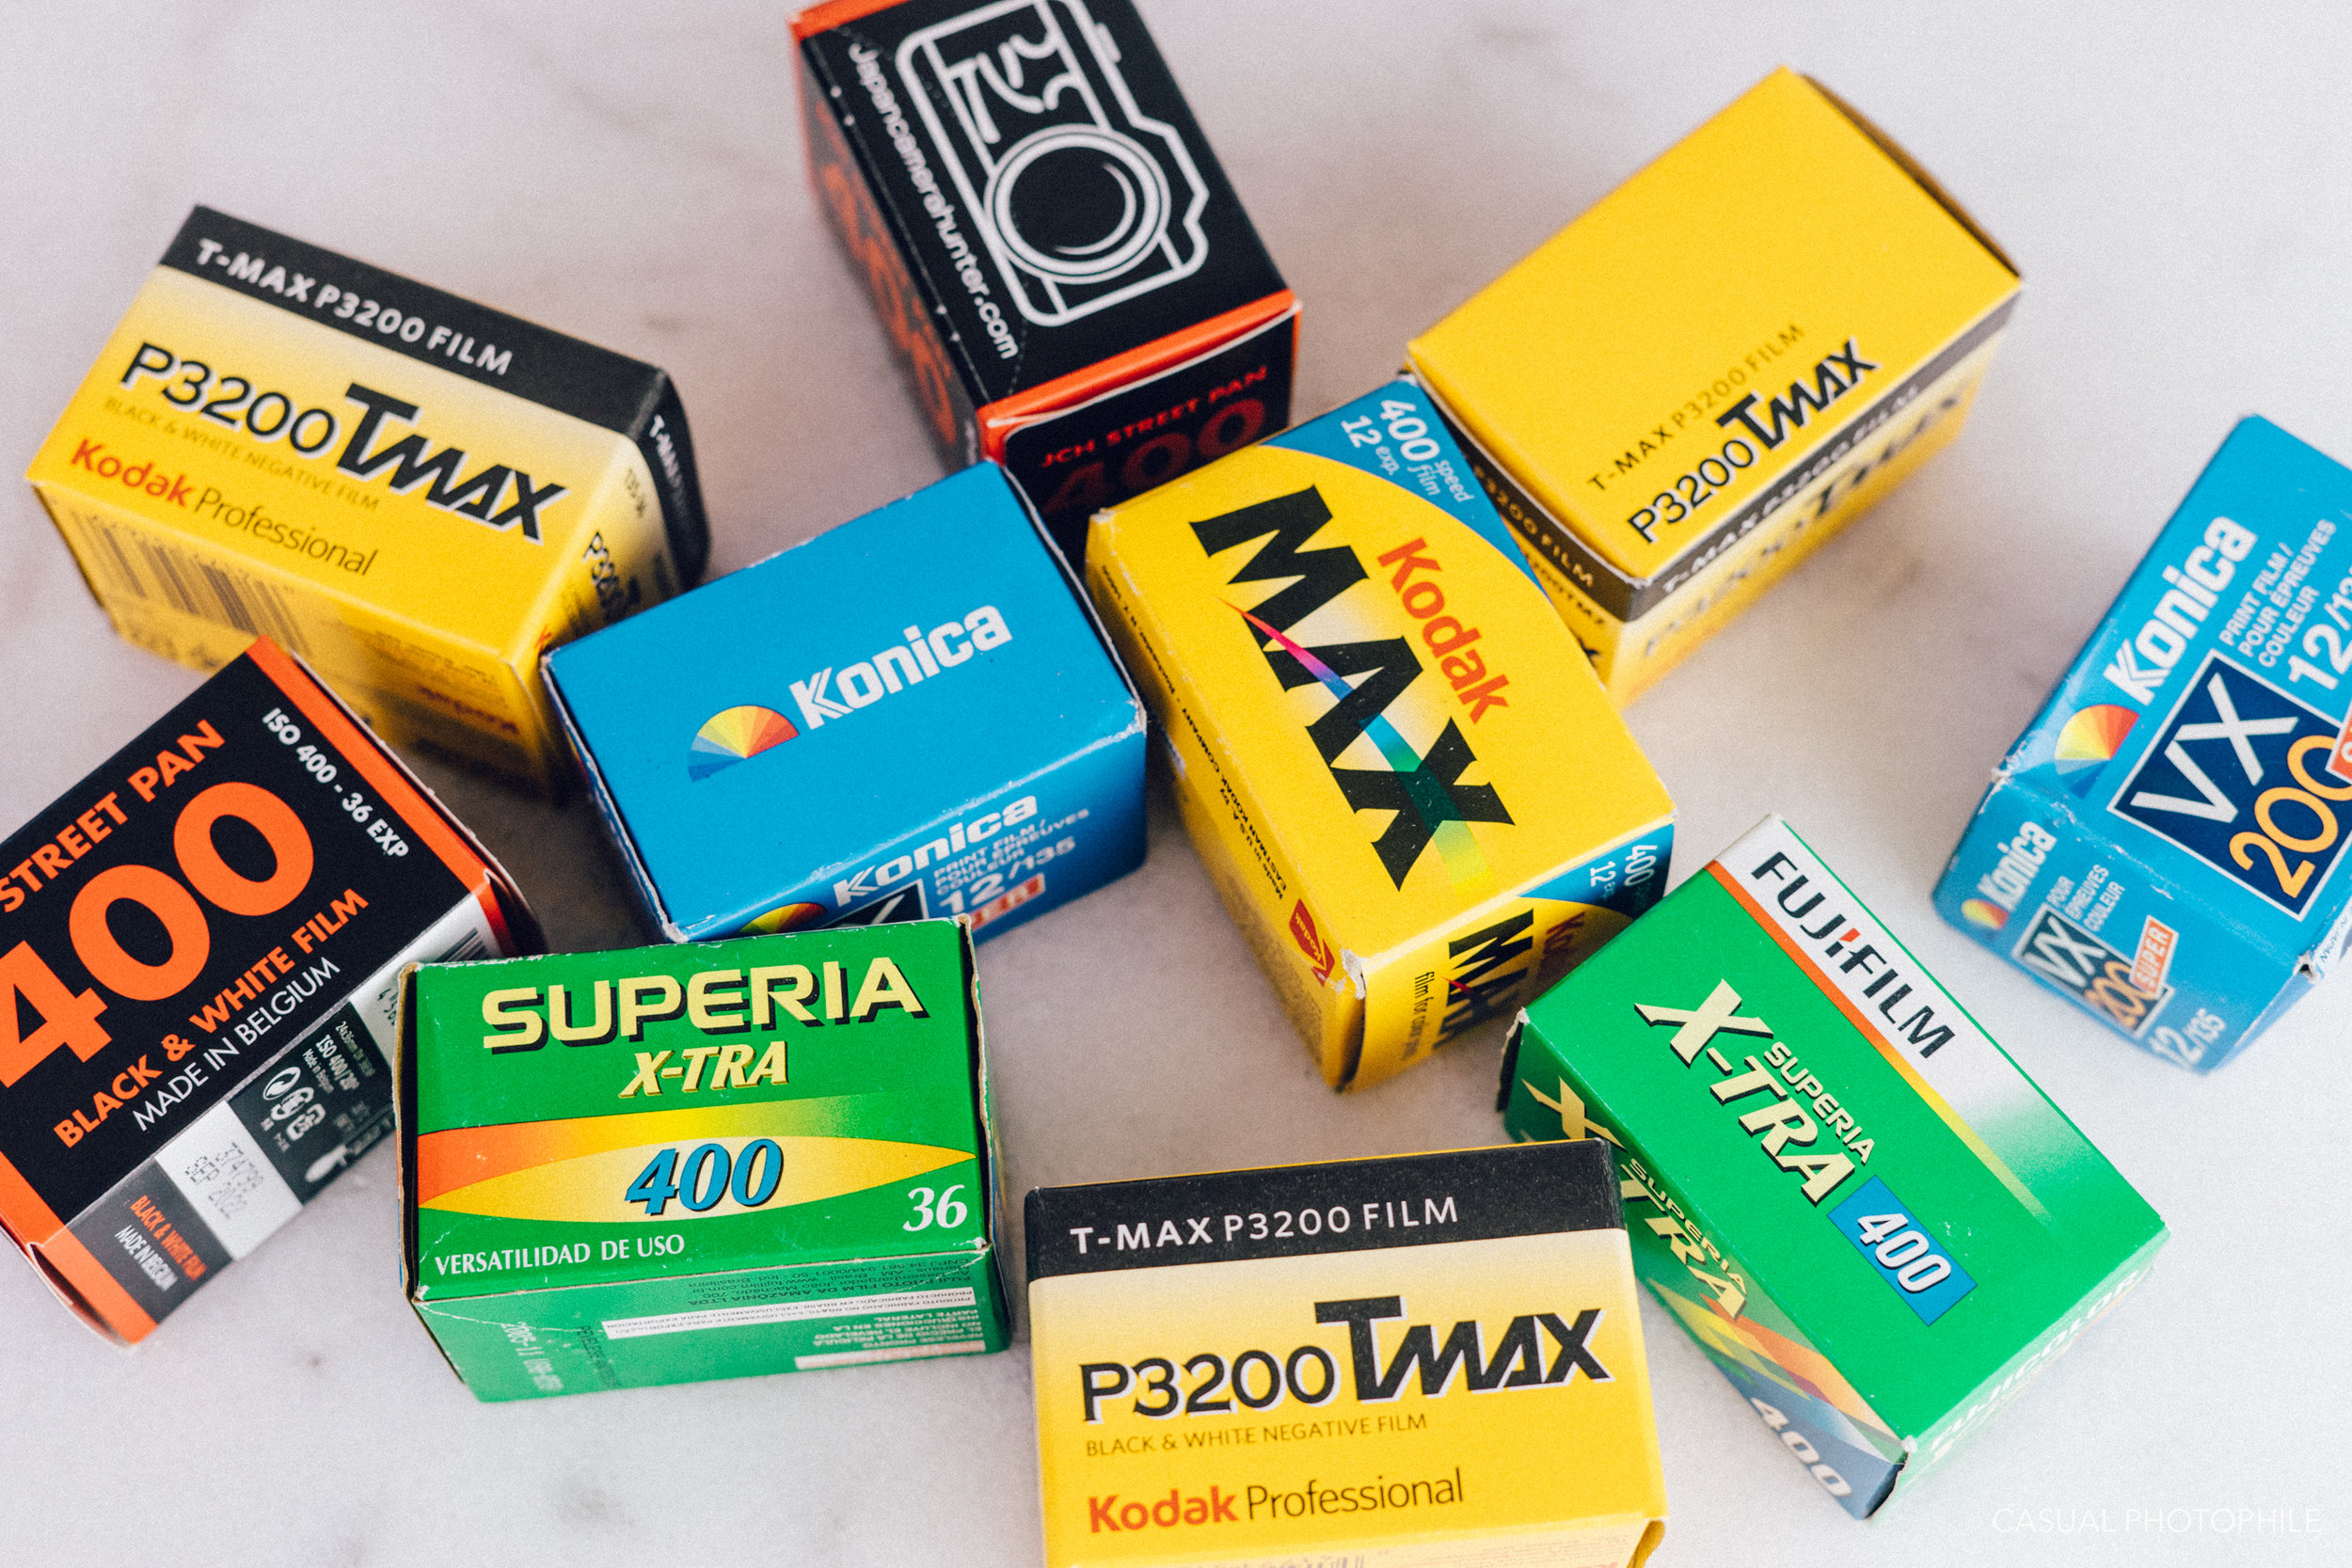 35 X 35 Kodak Film Boxes With 35 Rolls Of 35mm Film For, 55% OFF